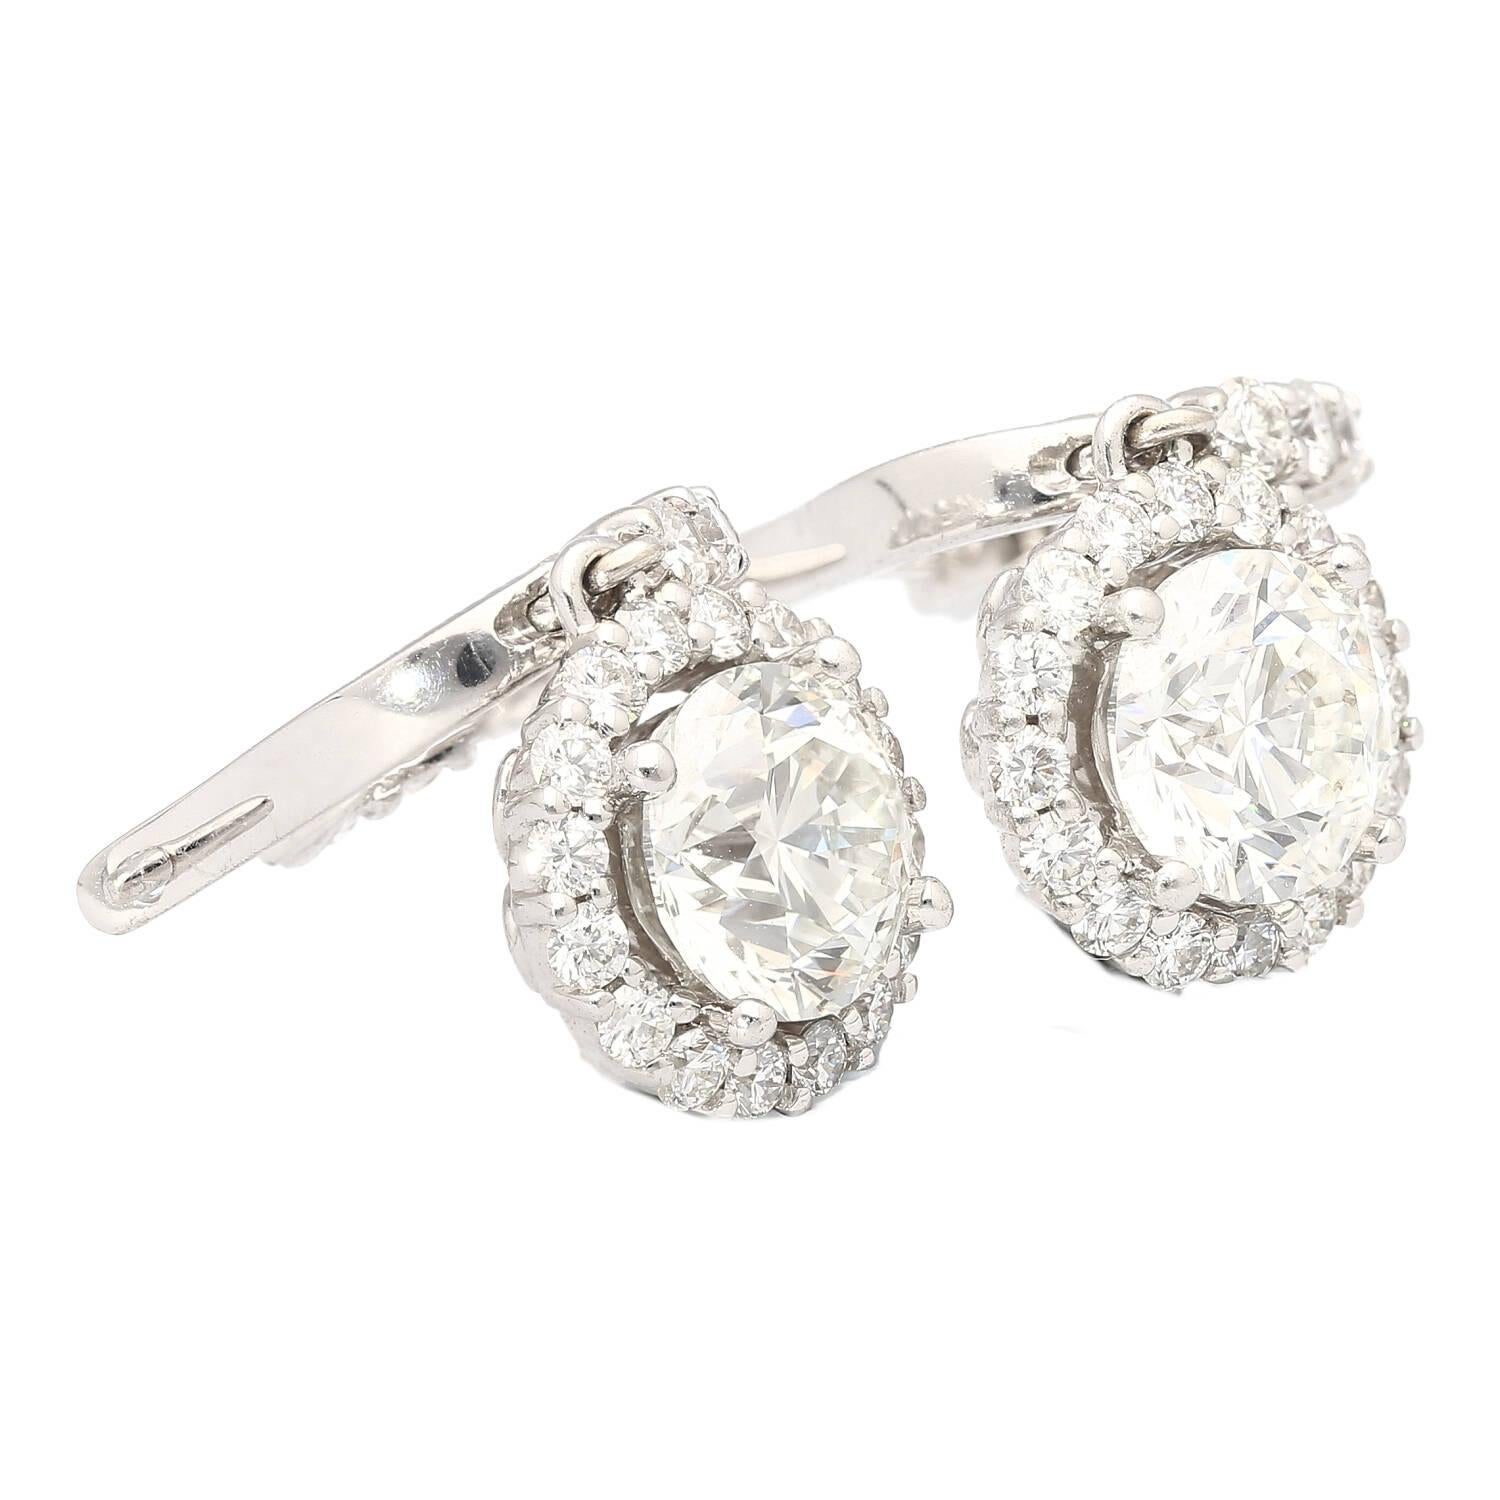 18k White Gold Diamond Dangle-Drop Earrings, a luxurious and elegant accessory. Each earring showcases a 1.53 carat GIA certified center stone, adorned by a round cut diamond halo. Designed with a latch back closure and secure hoop wire connection,